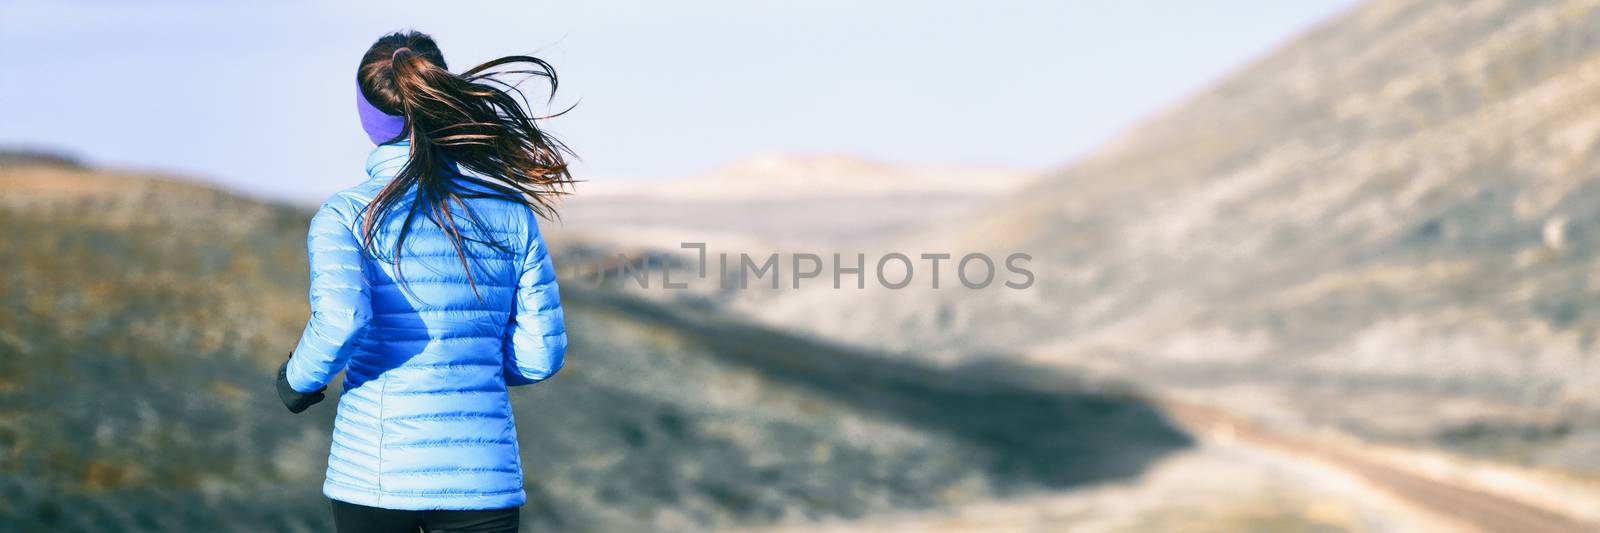 Winter running woman on trail run outdoors in snowy mountains background. Panoramic banner with copy space on white snow.